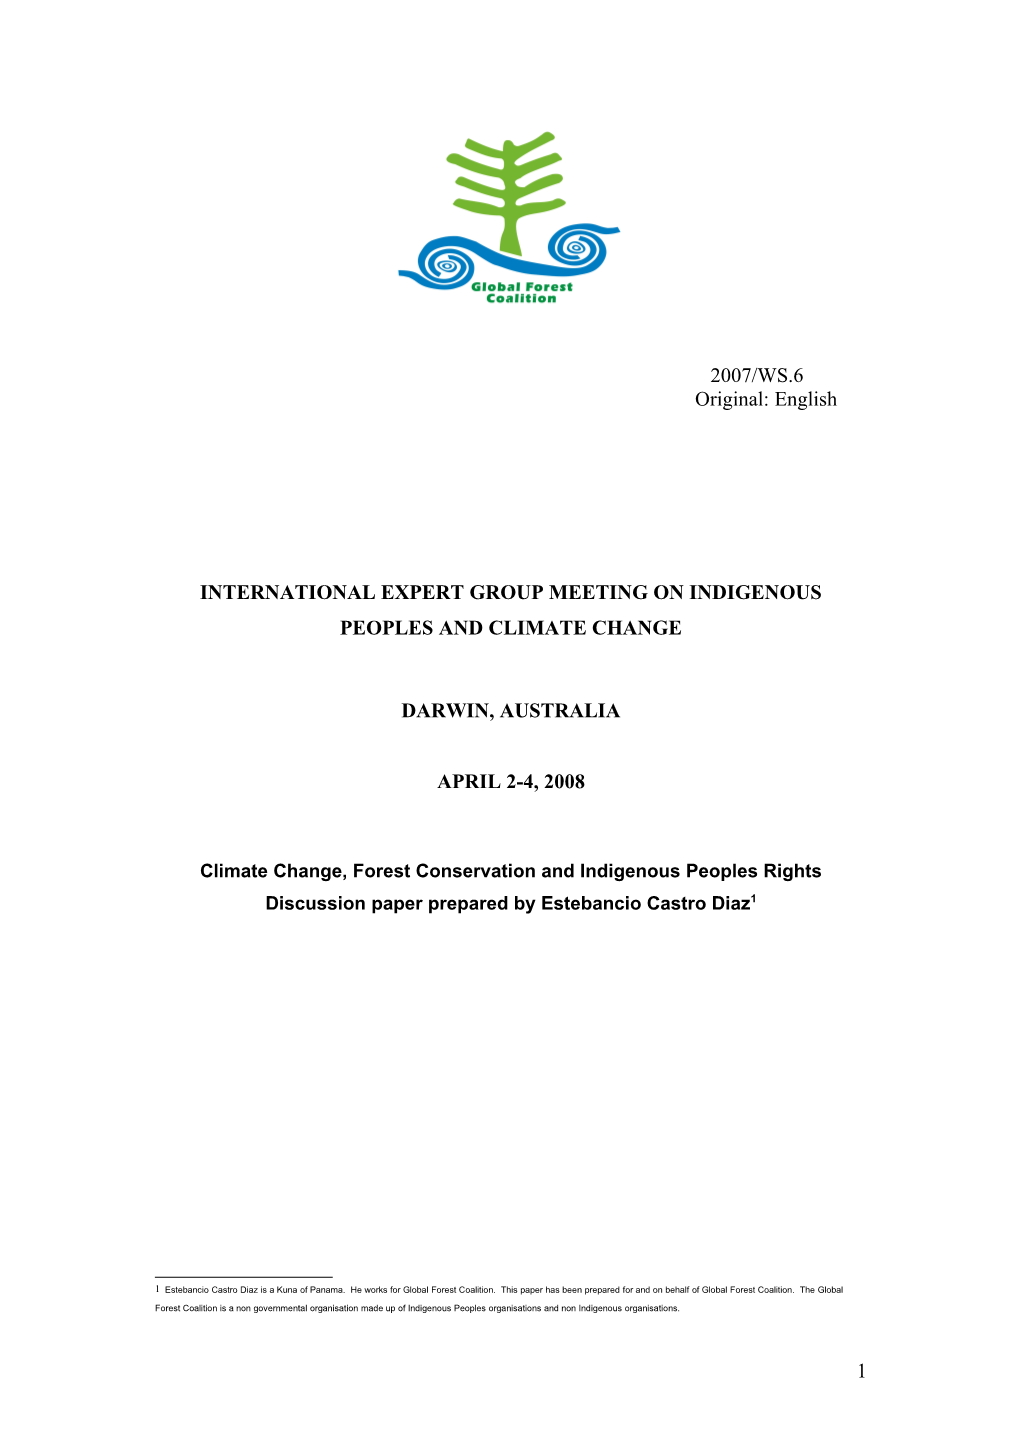 Indigenous Peoples and Climate Change